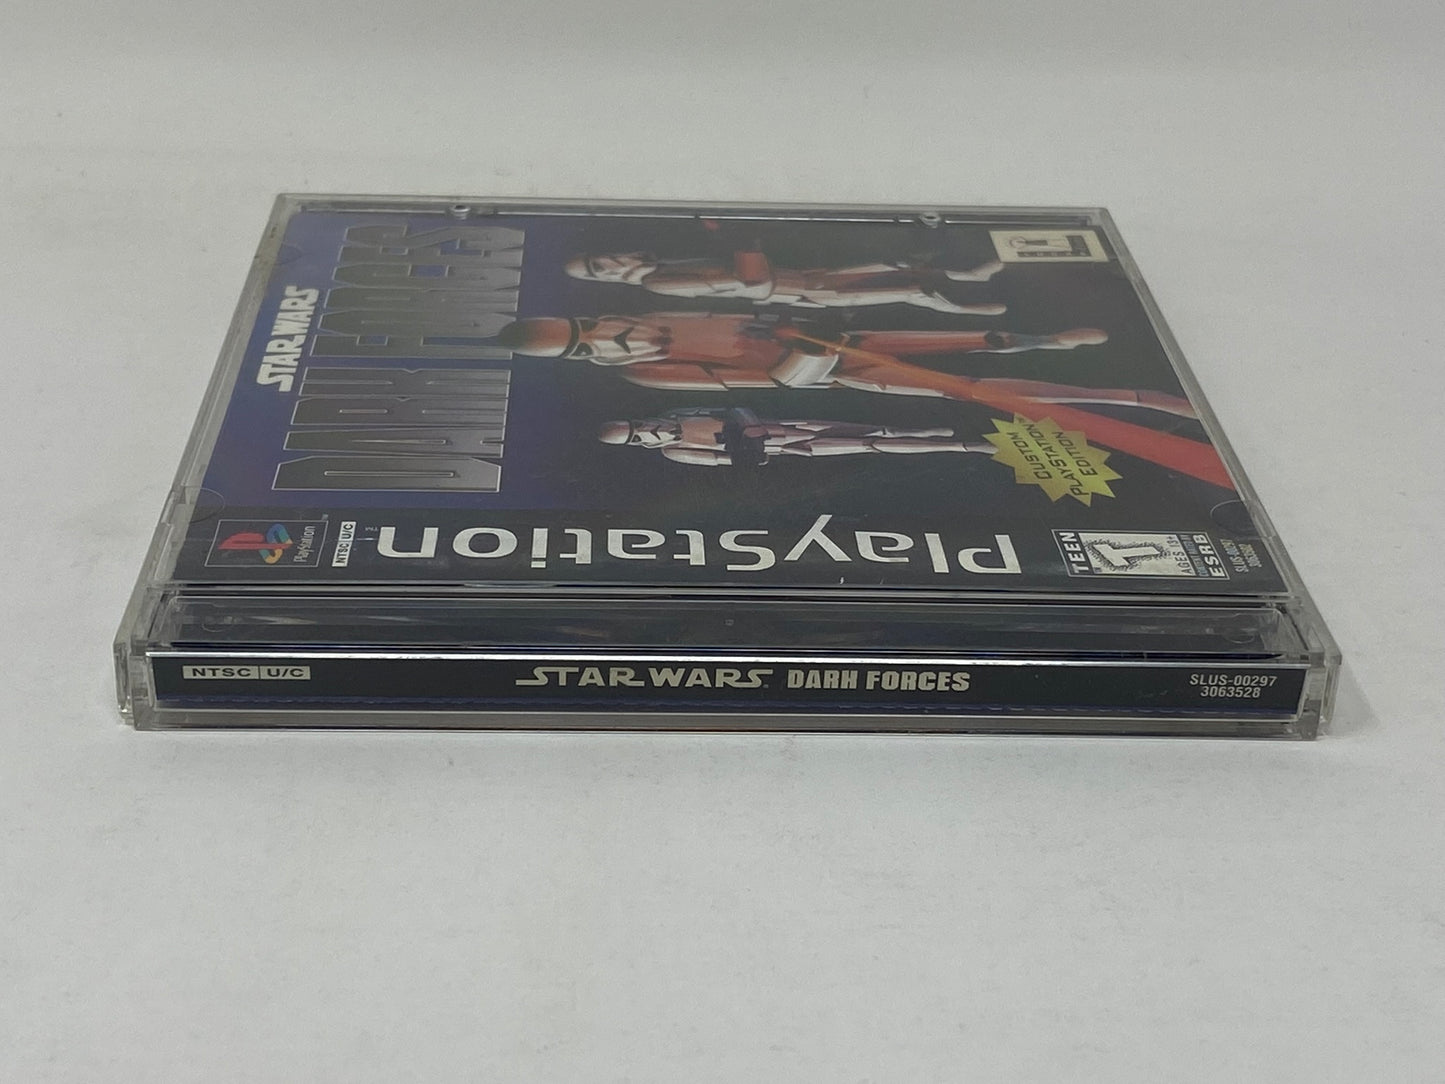 Sony PlayStation PS1 - Star Wars Dark Forces - Complete